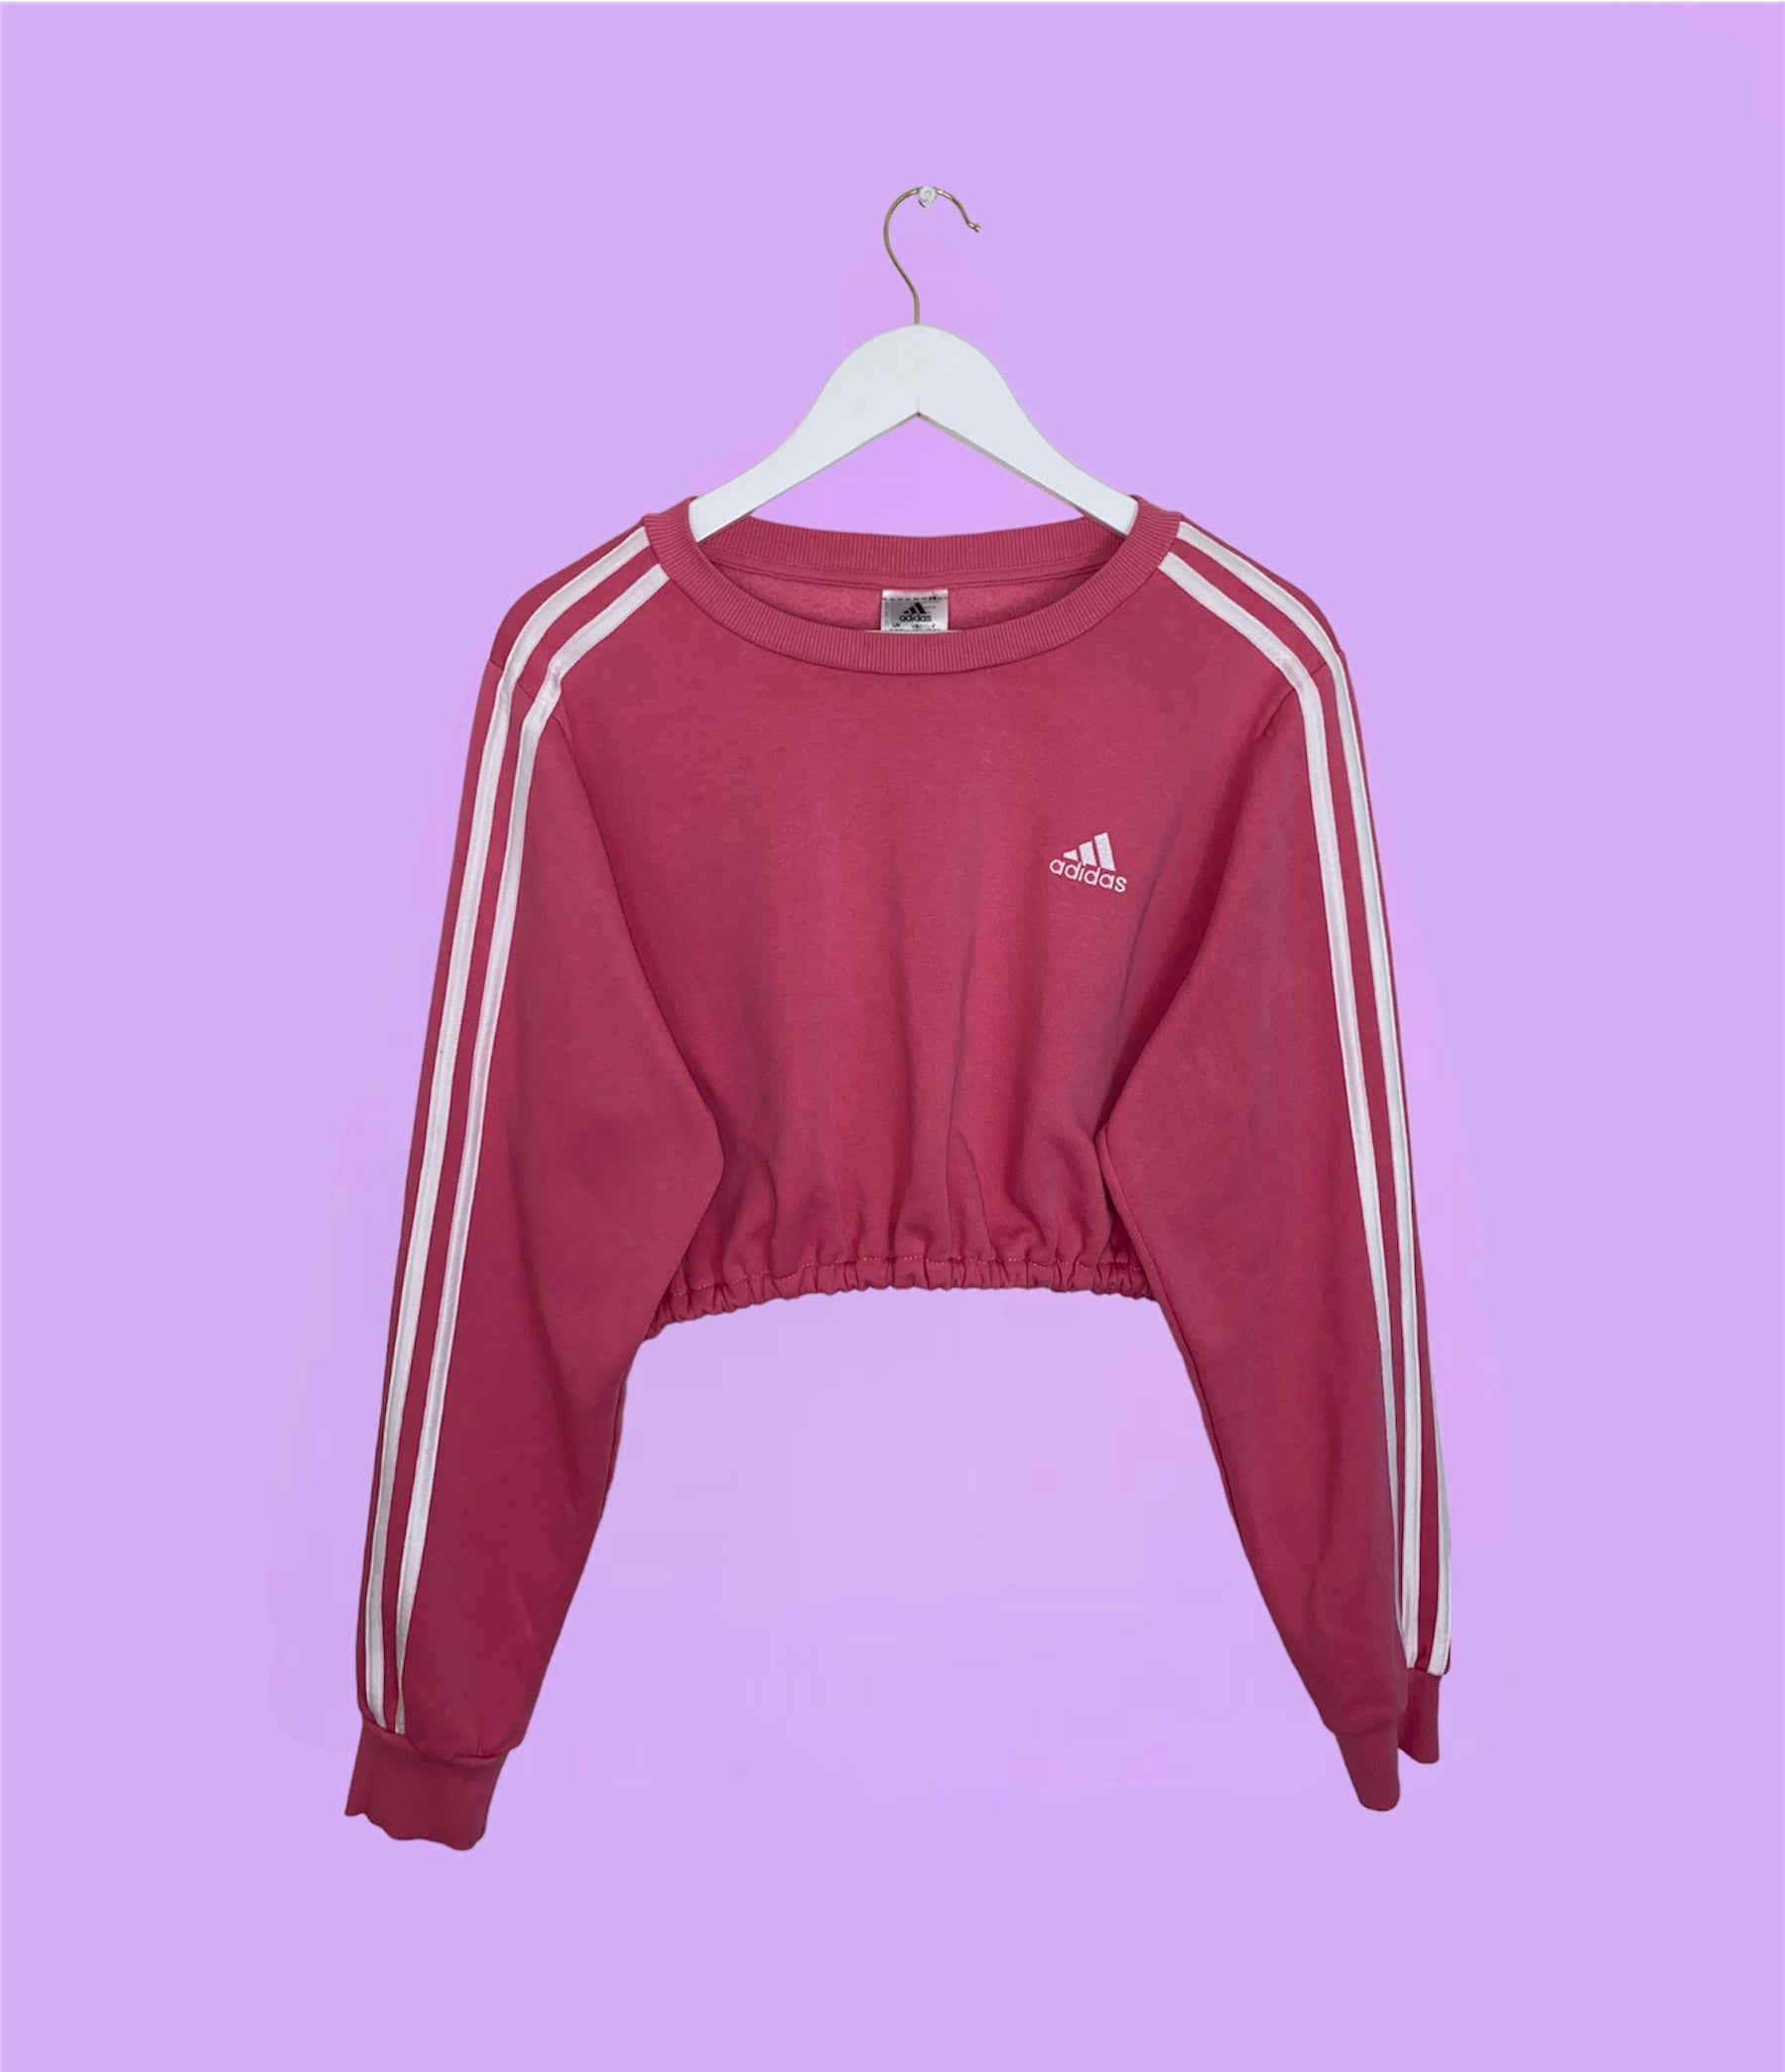 pink adidas cropped sweatshirt with white adidas logo shown on a lilac background